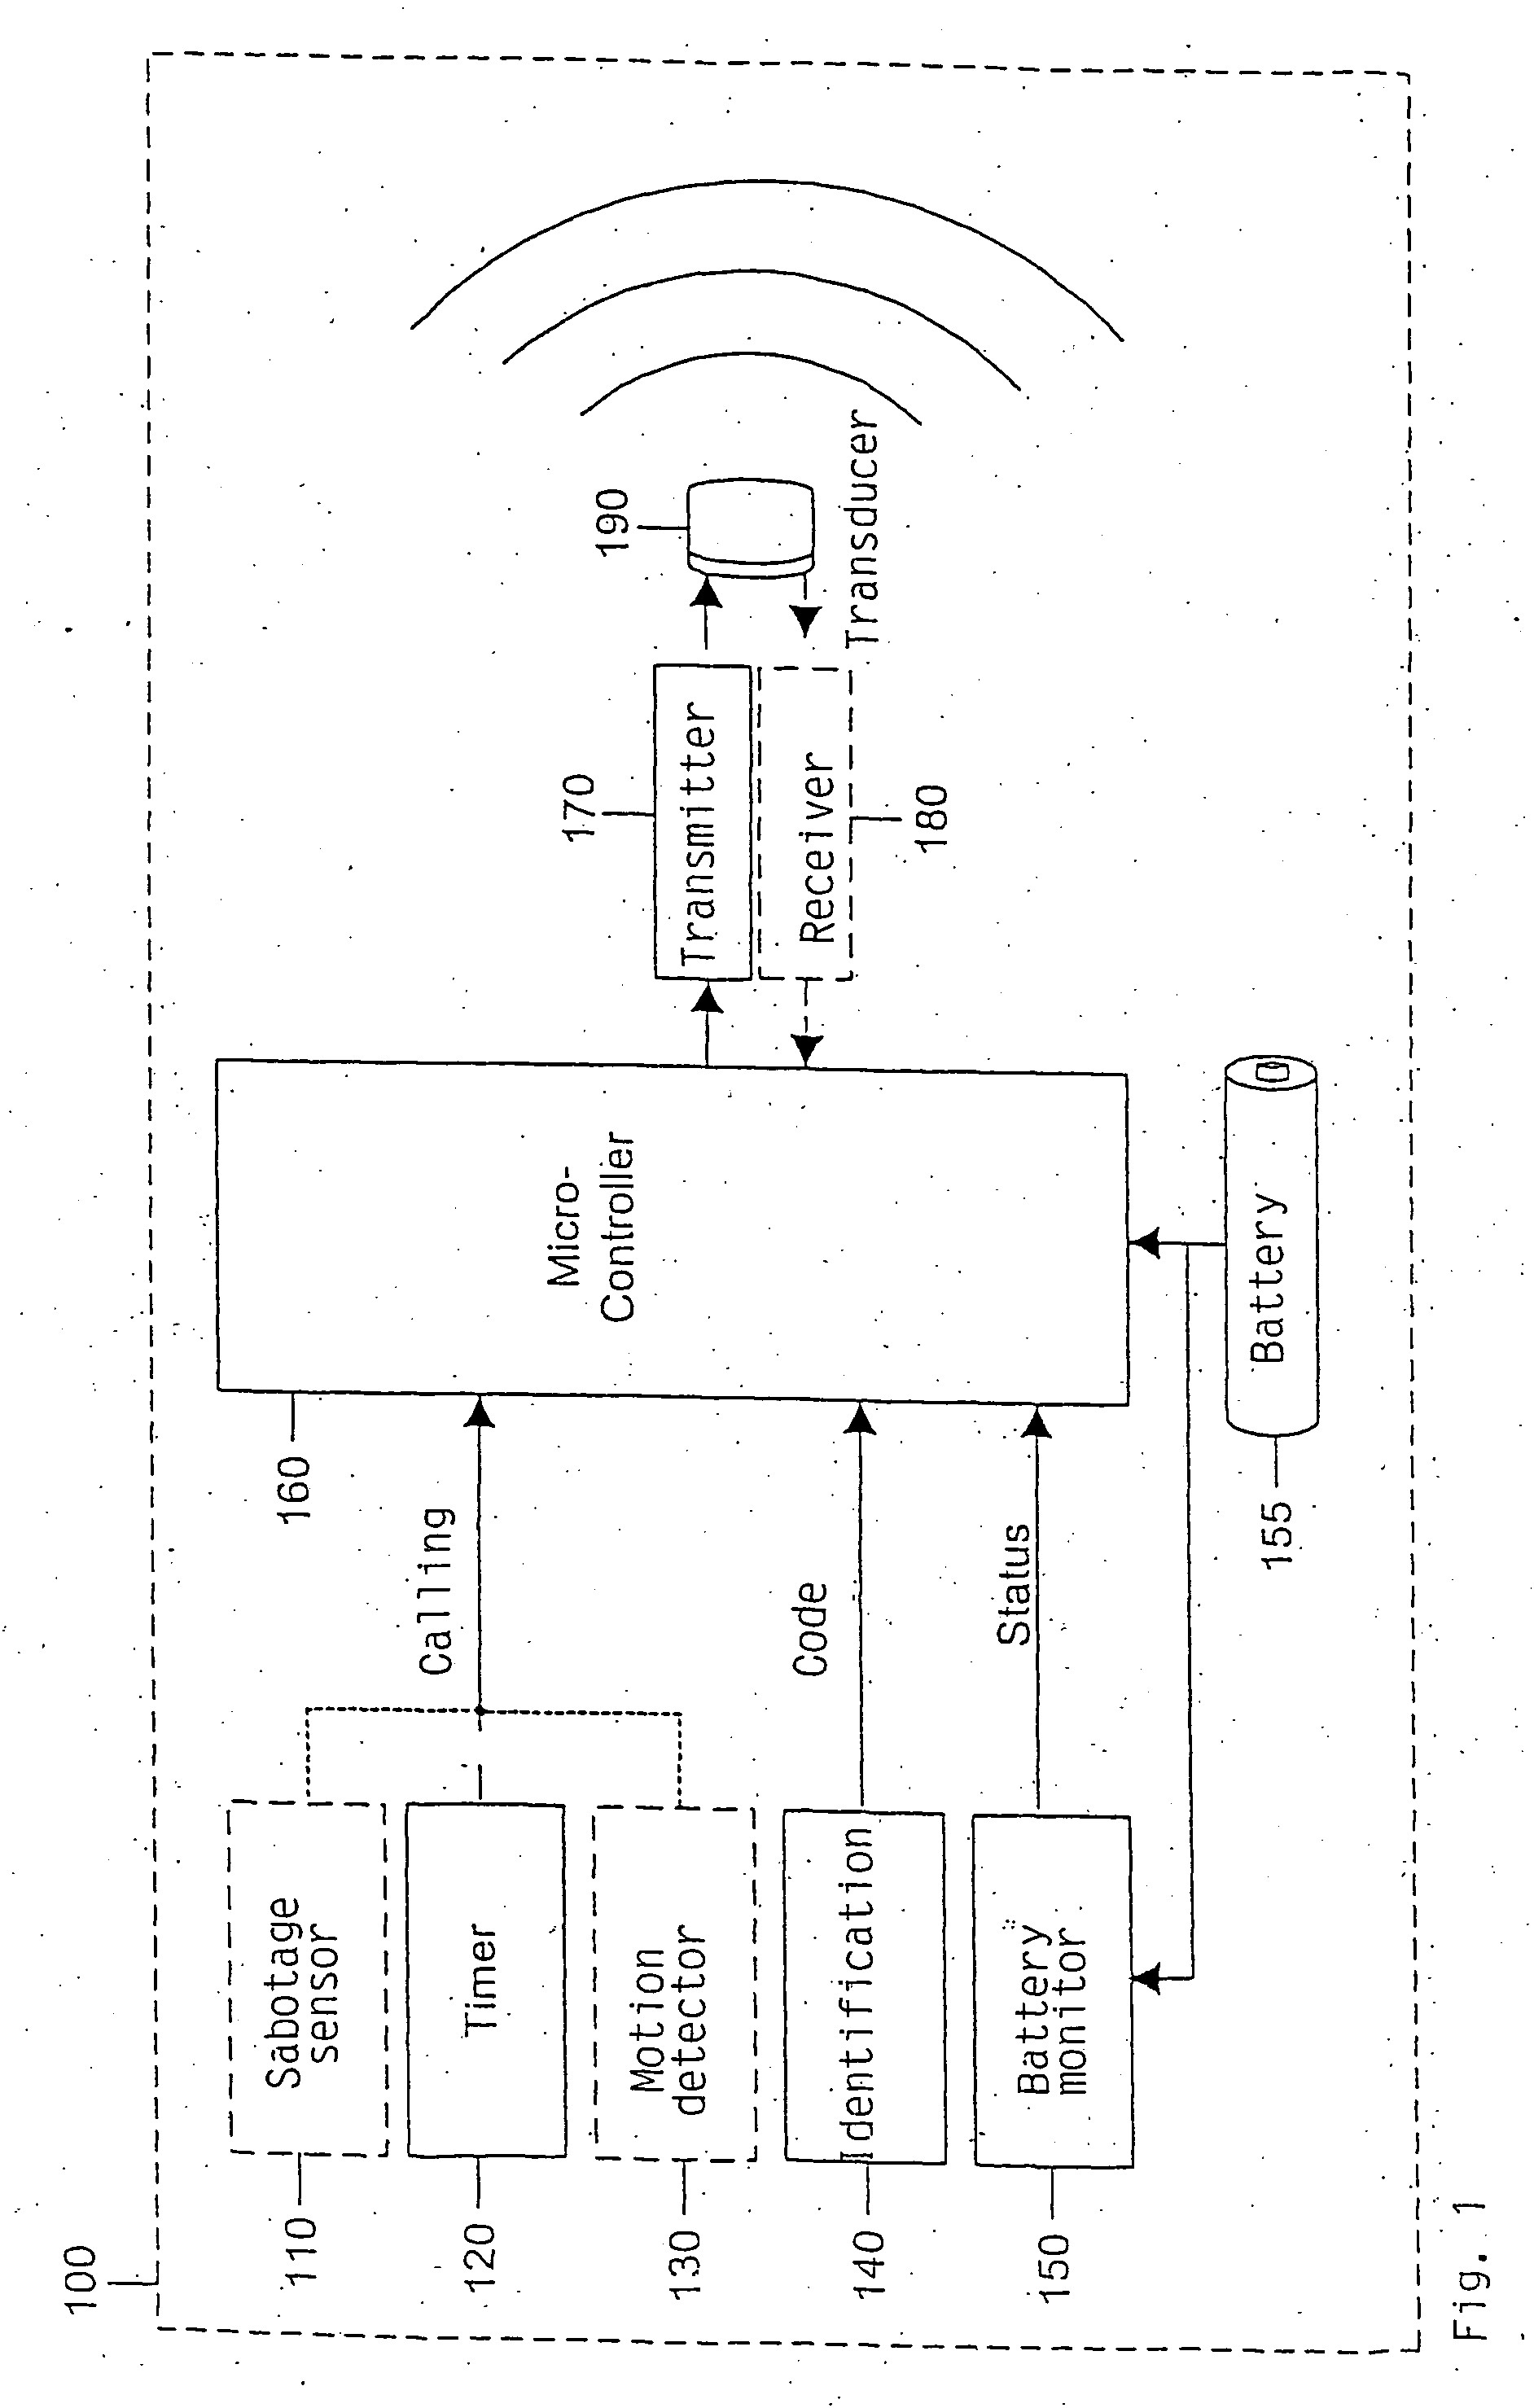 System and method for position determination of objects